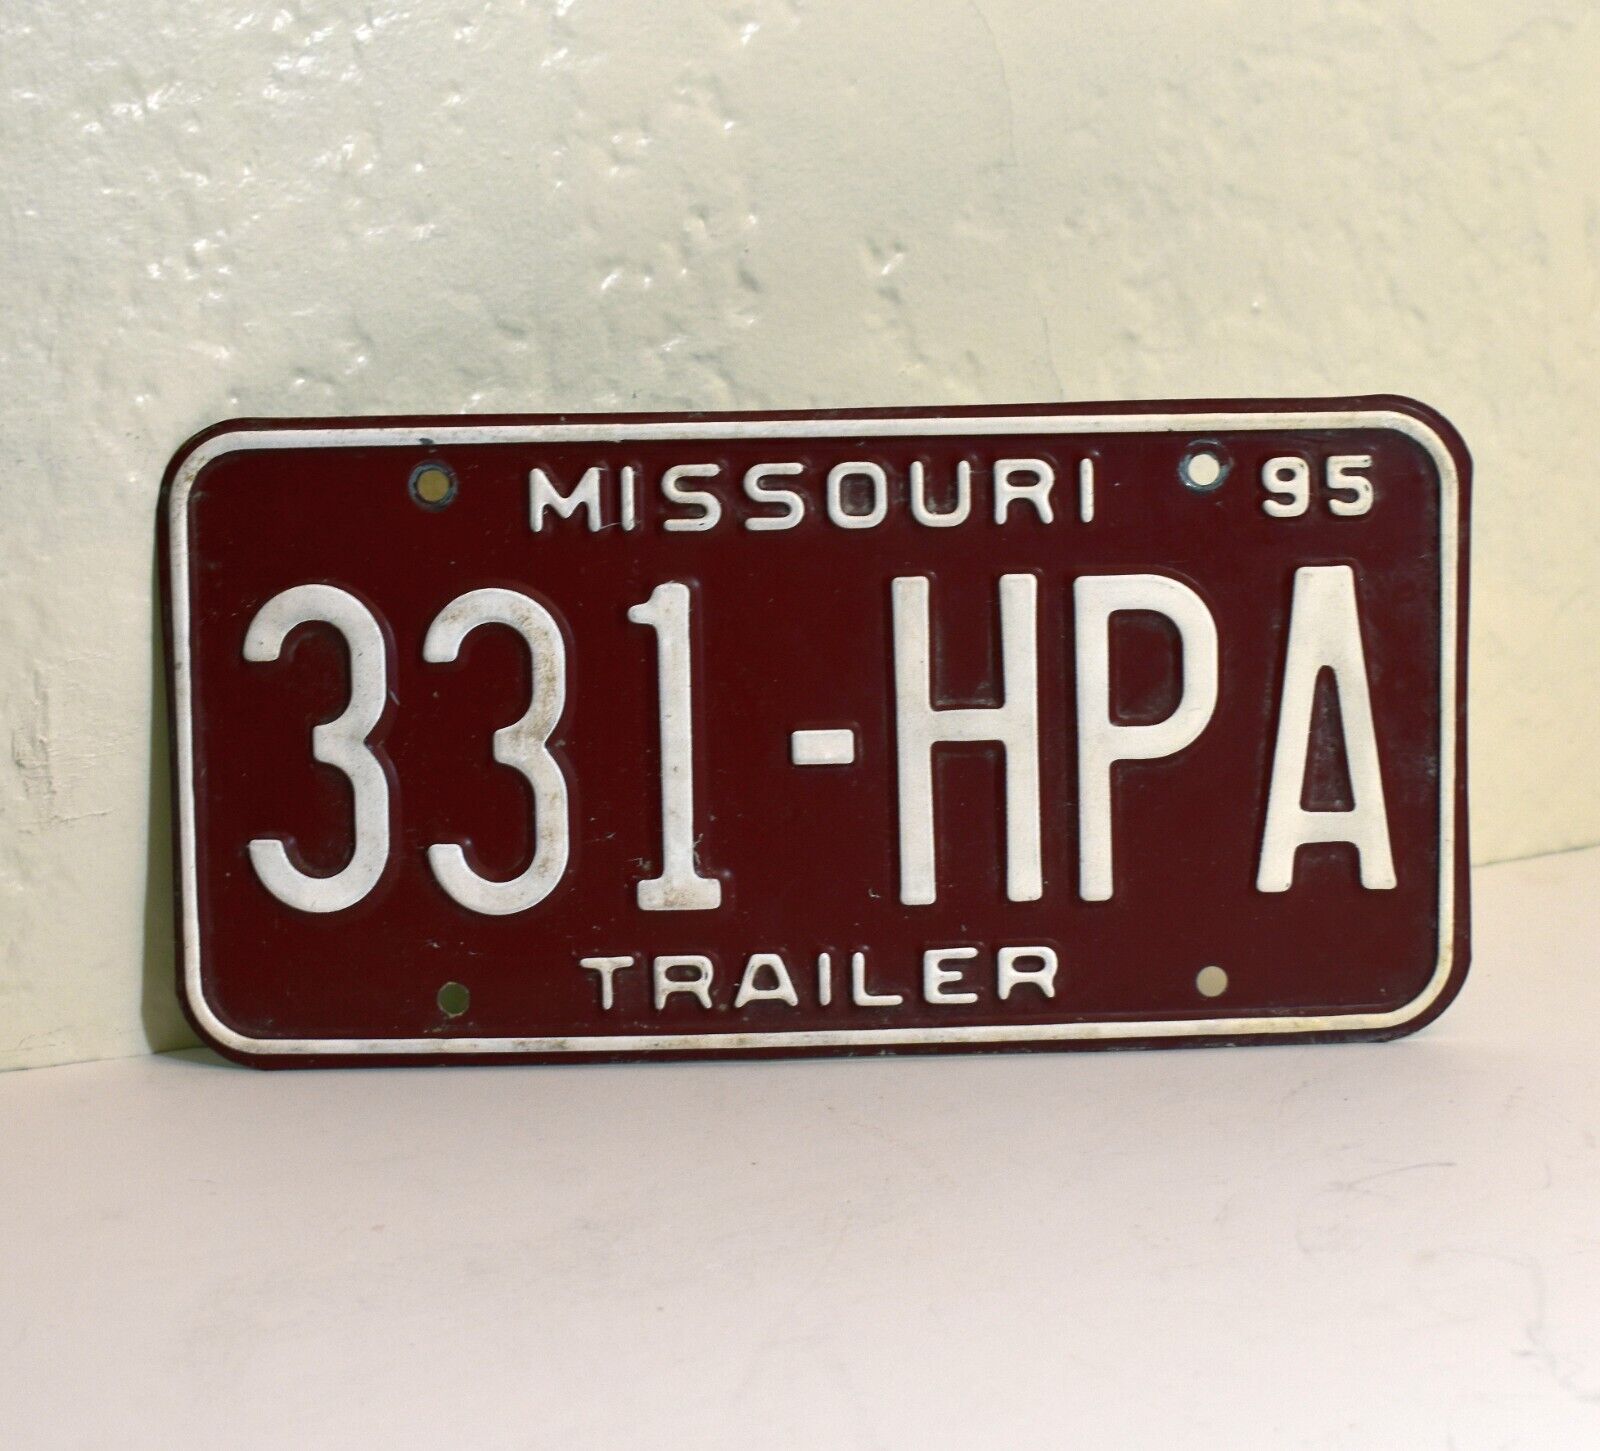 1995 Missouri License Plate - 331 HPA 1995  SHOW-ME STATE trailer